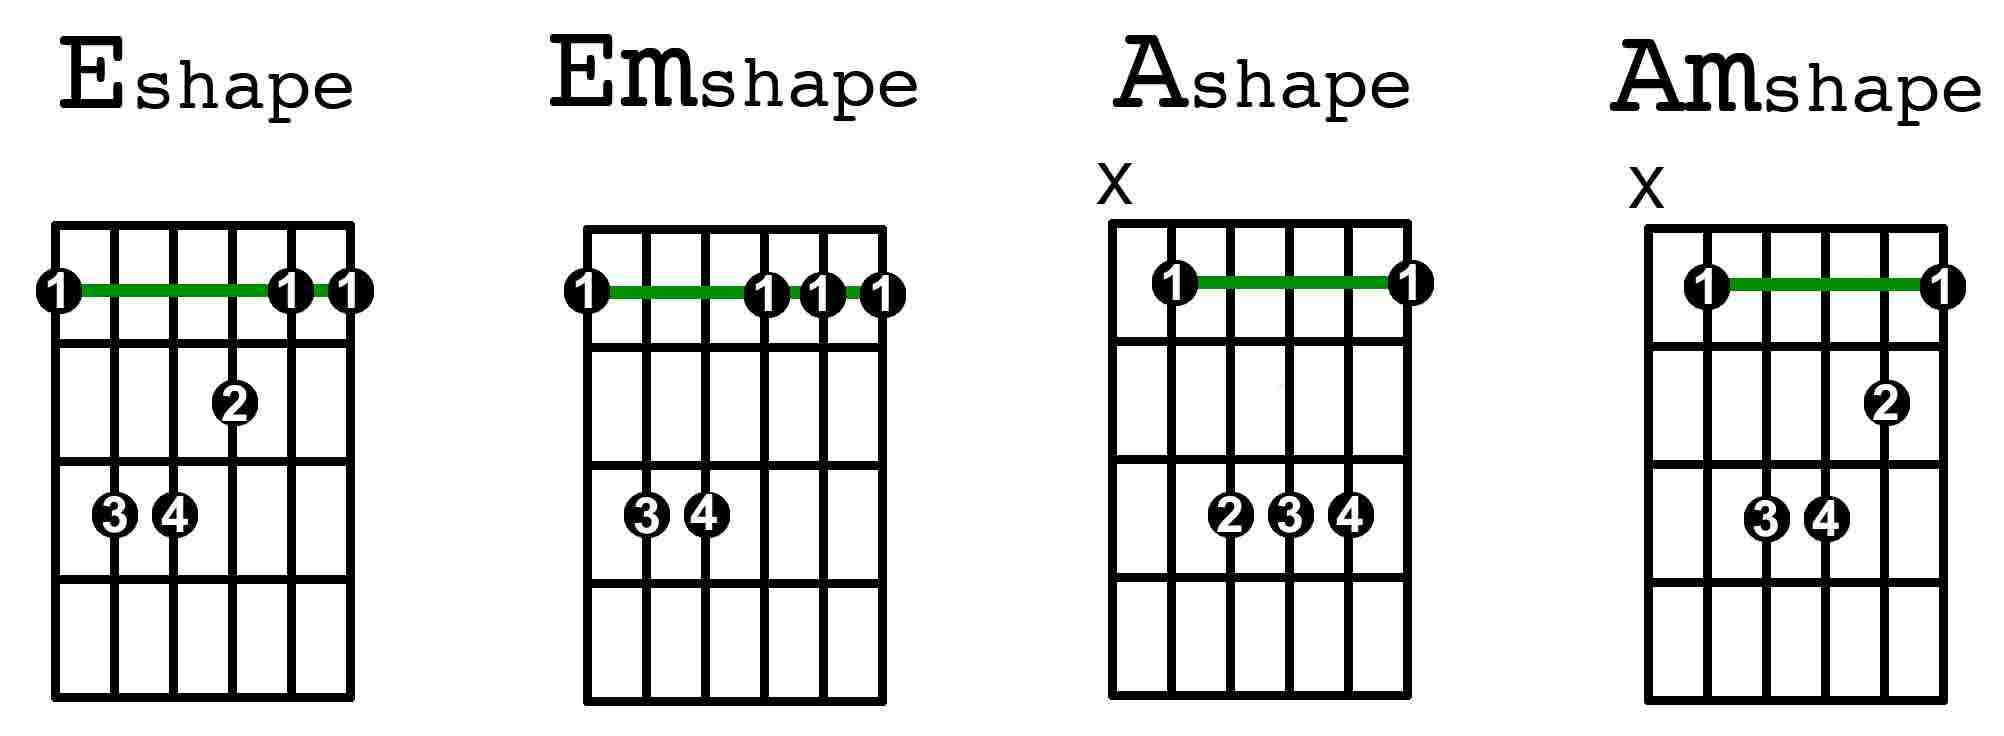 E Minor Chord The Four Most Essential Barre Chords Guitarhabits